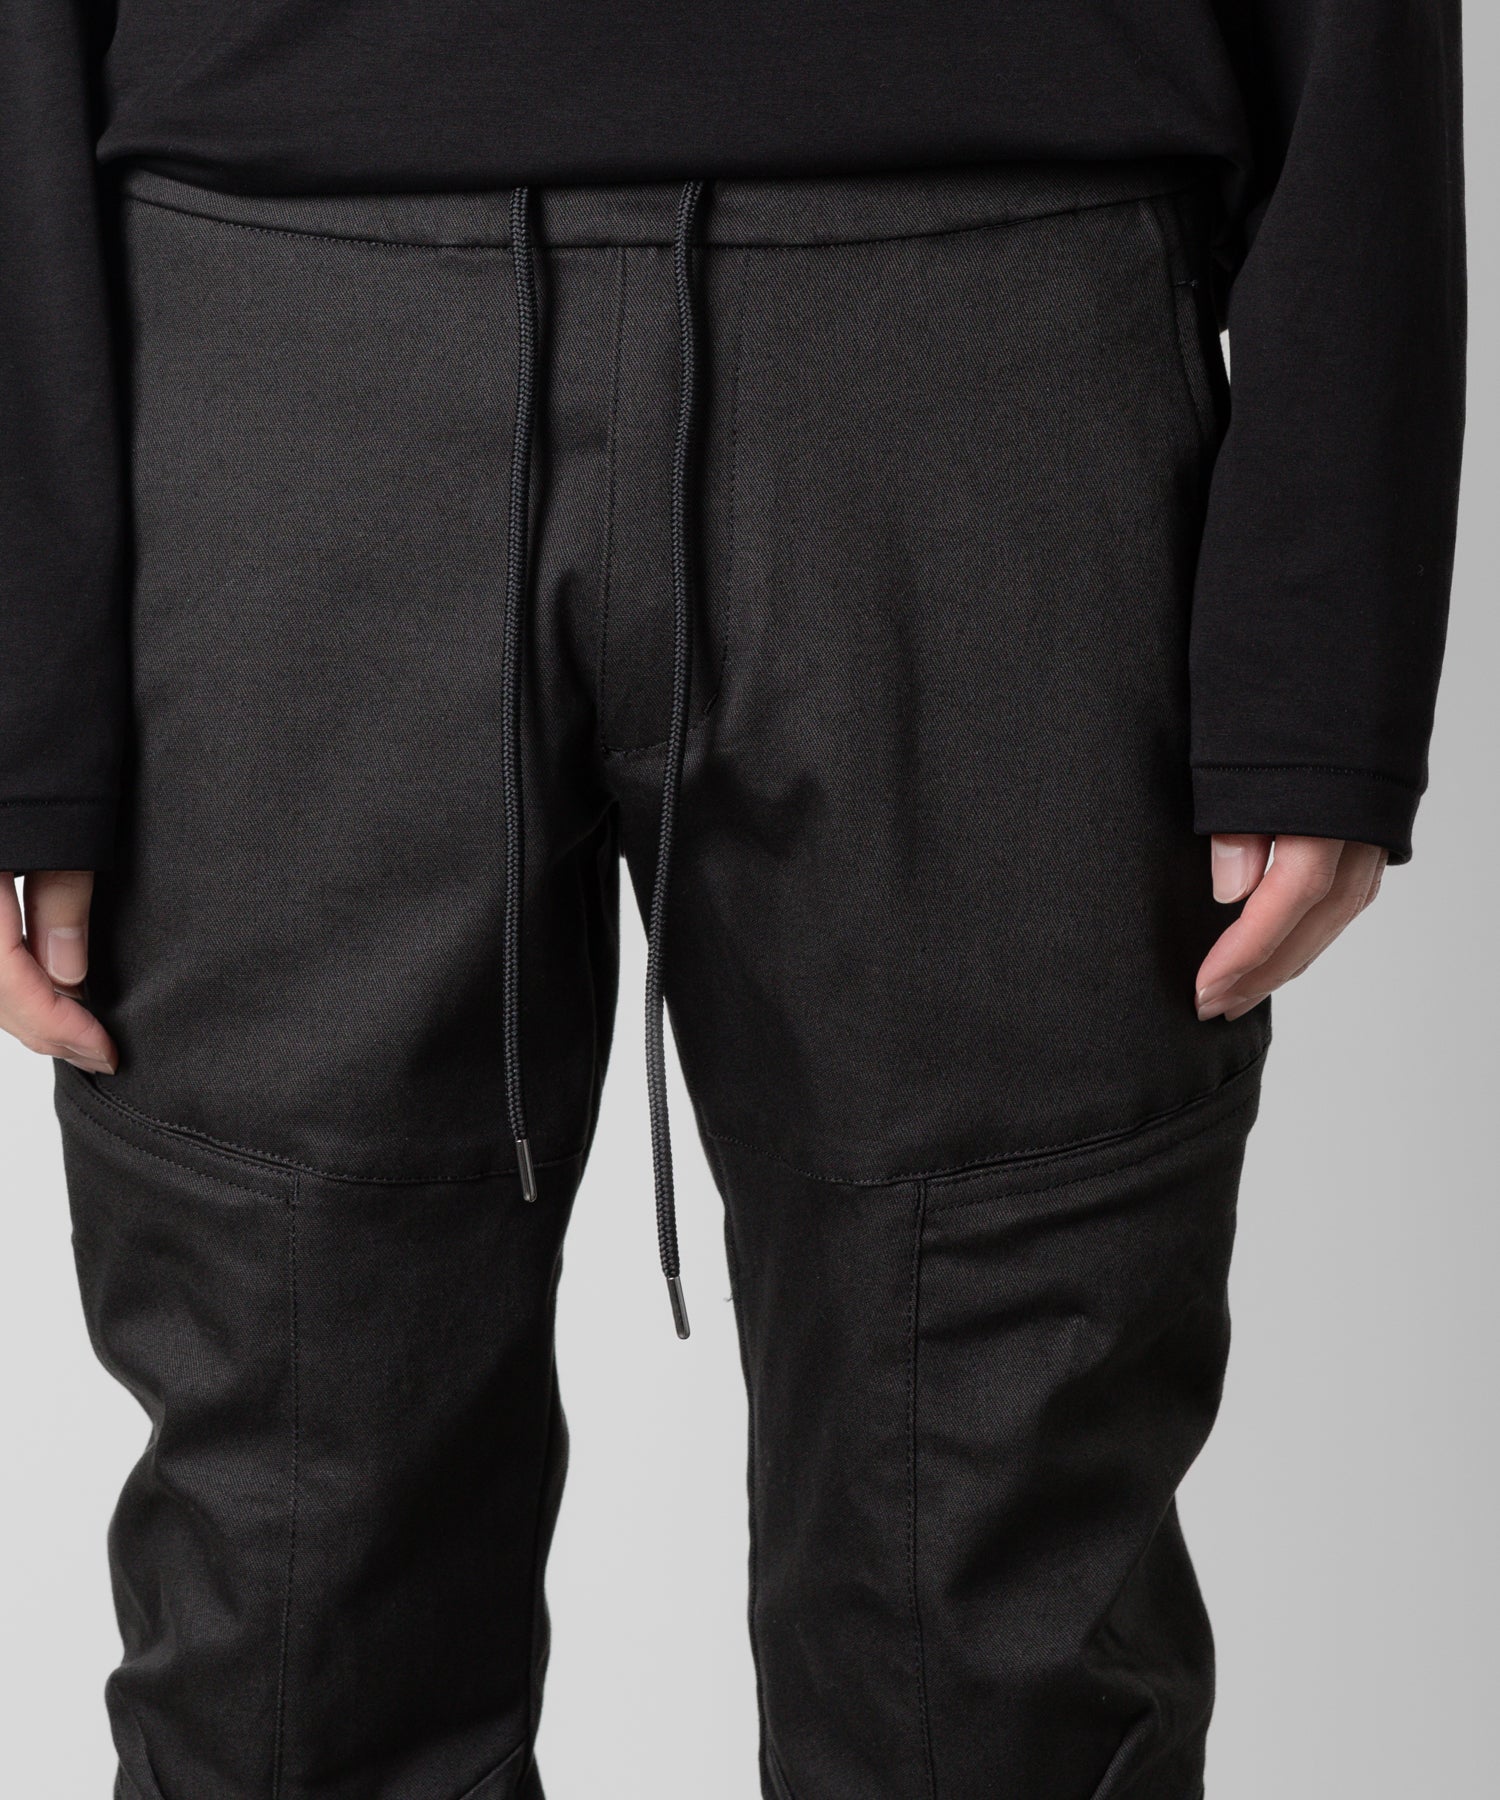 【ATTACHMENT】ATTACHMENT アタッチメントのRUBBER STRETCH TWILL EASY CARGO TROUSERS - D.GRAY  公式通販サイトsession福岡セレクトショップ